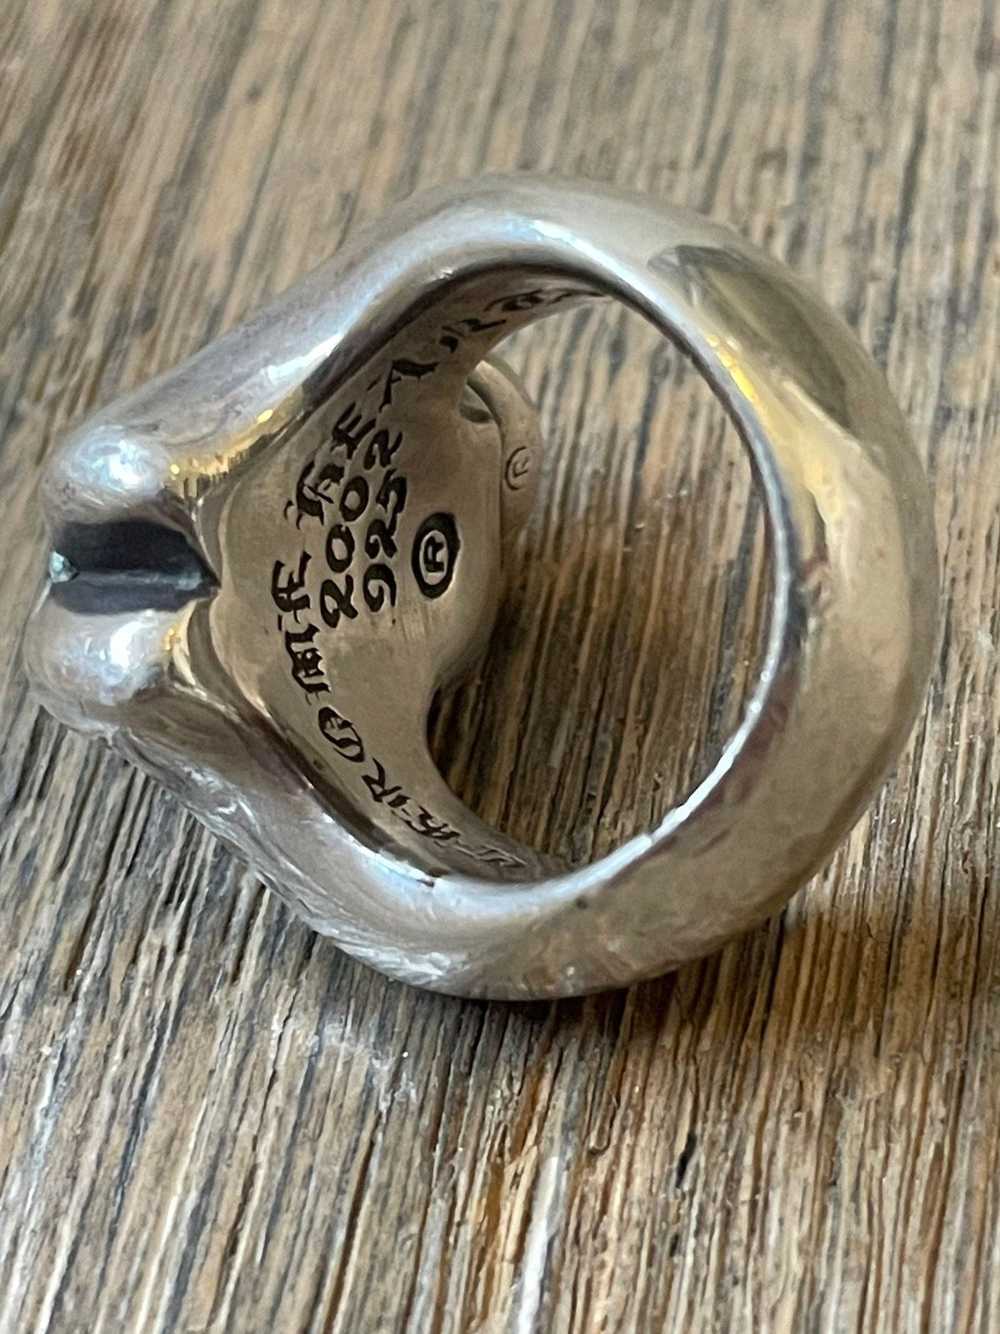 Chrome Hearts Chrome Hearts Rolling Stones Ring - image 2